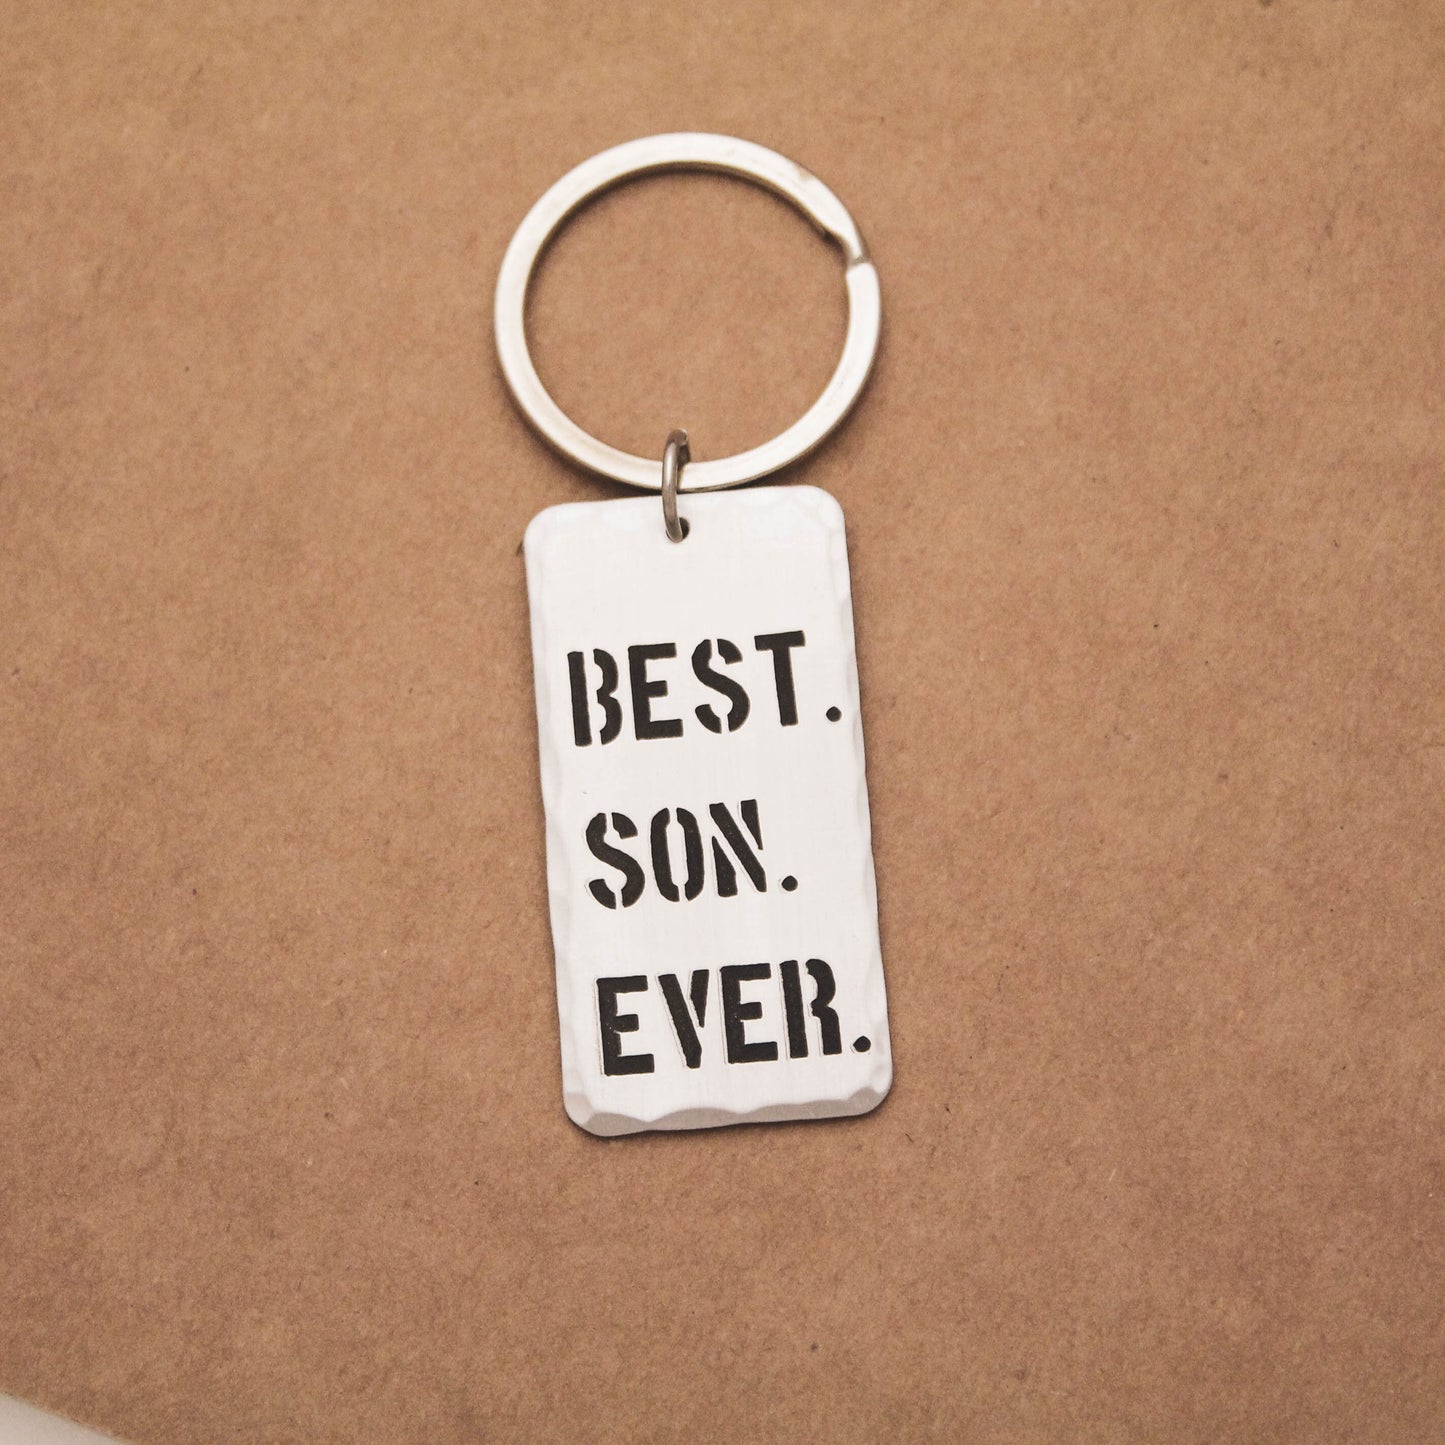 Best Son Ever Keychain, Personalized Key Chain, Gifts for Sons, Gifts for Him, Handstamped, Personalized Gift, Son Gift Keychain, Son Gift